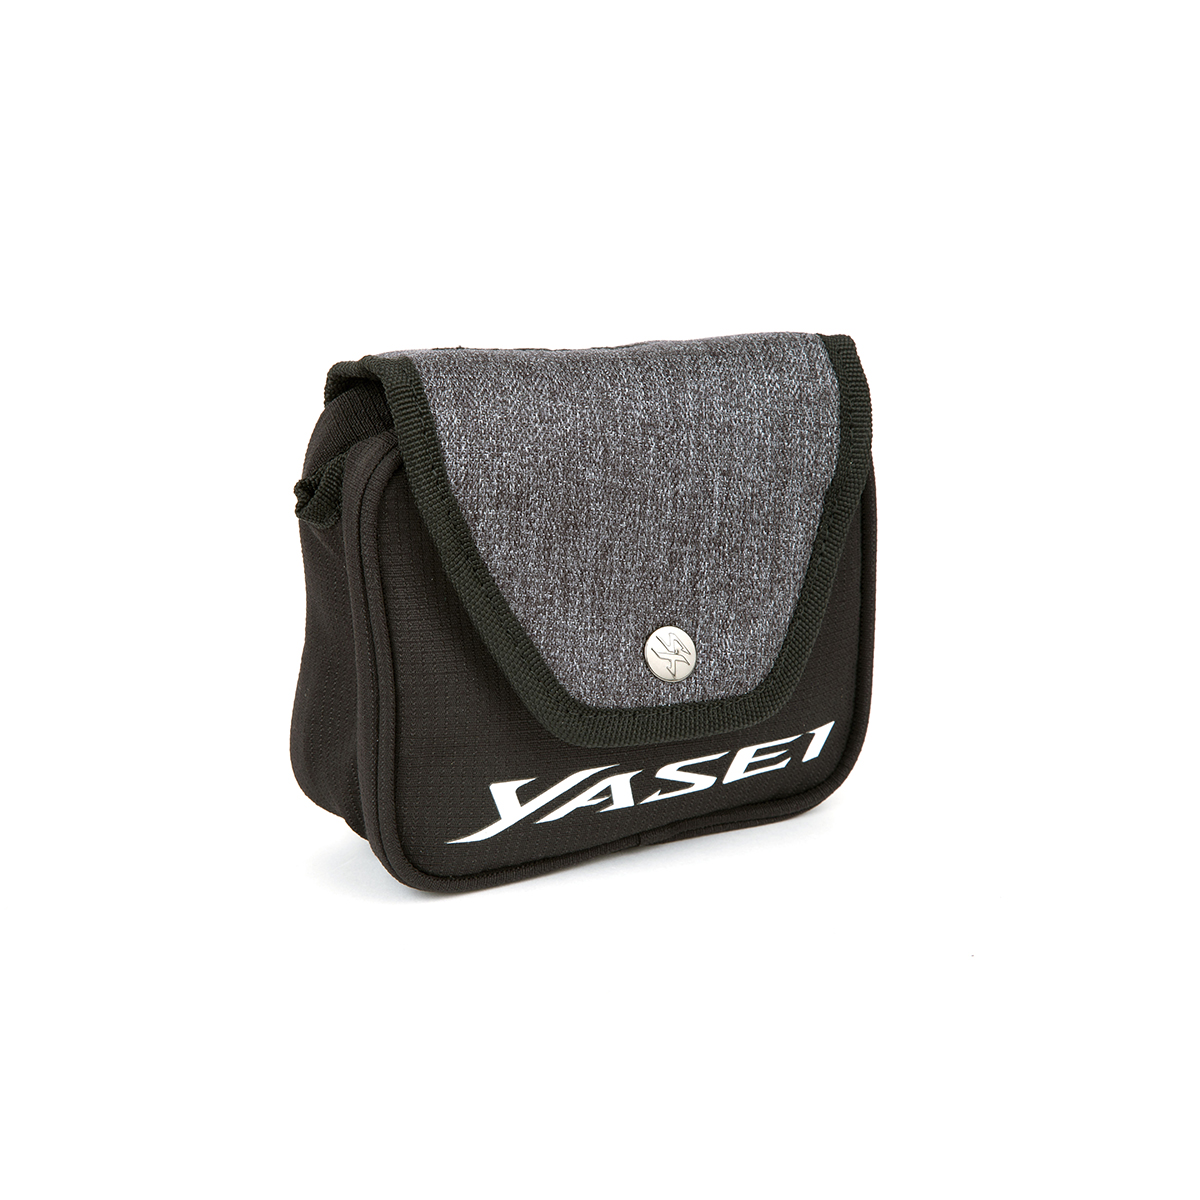 Shimano Yasei Sync Reel Case From